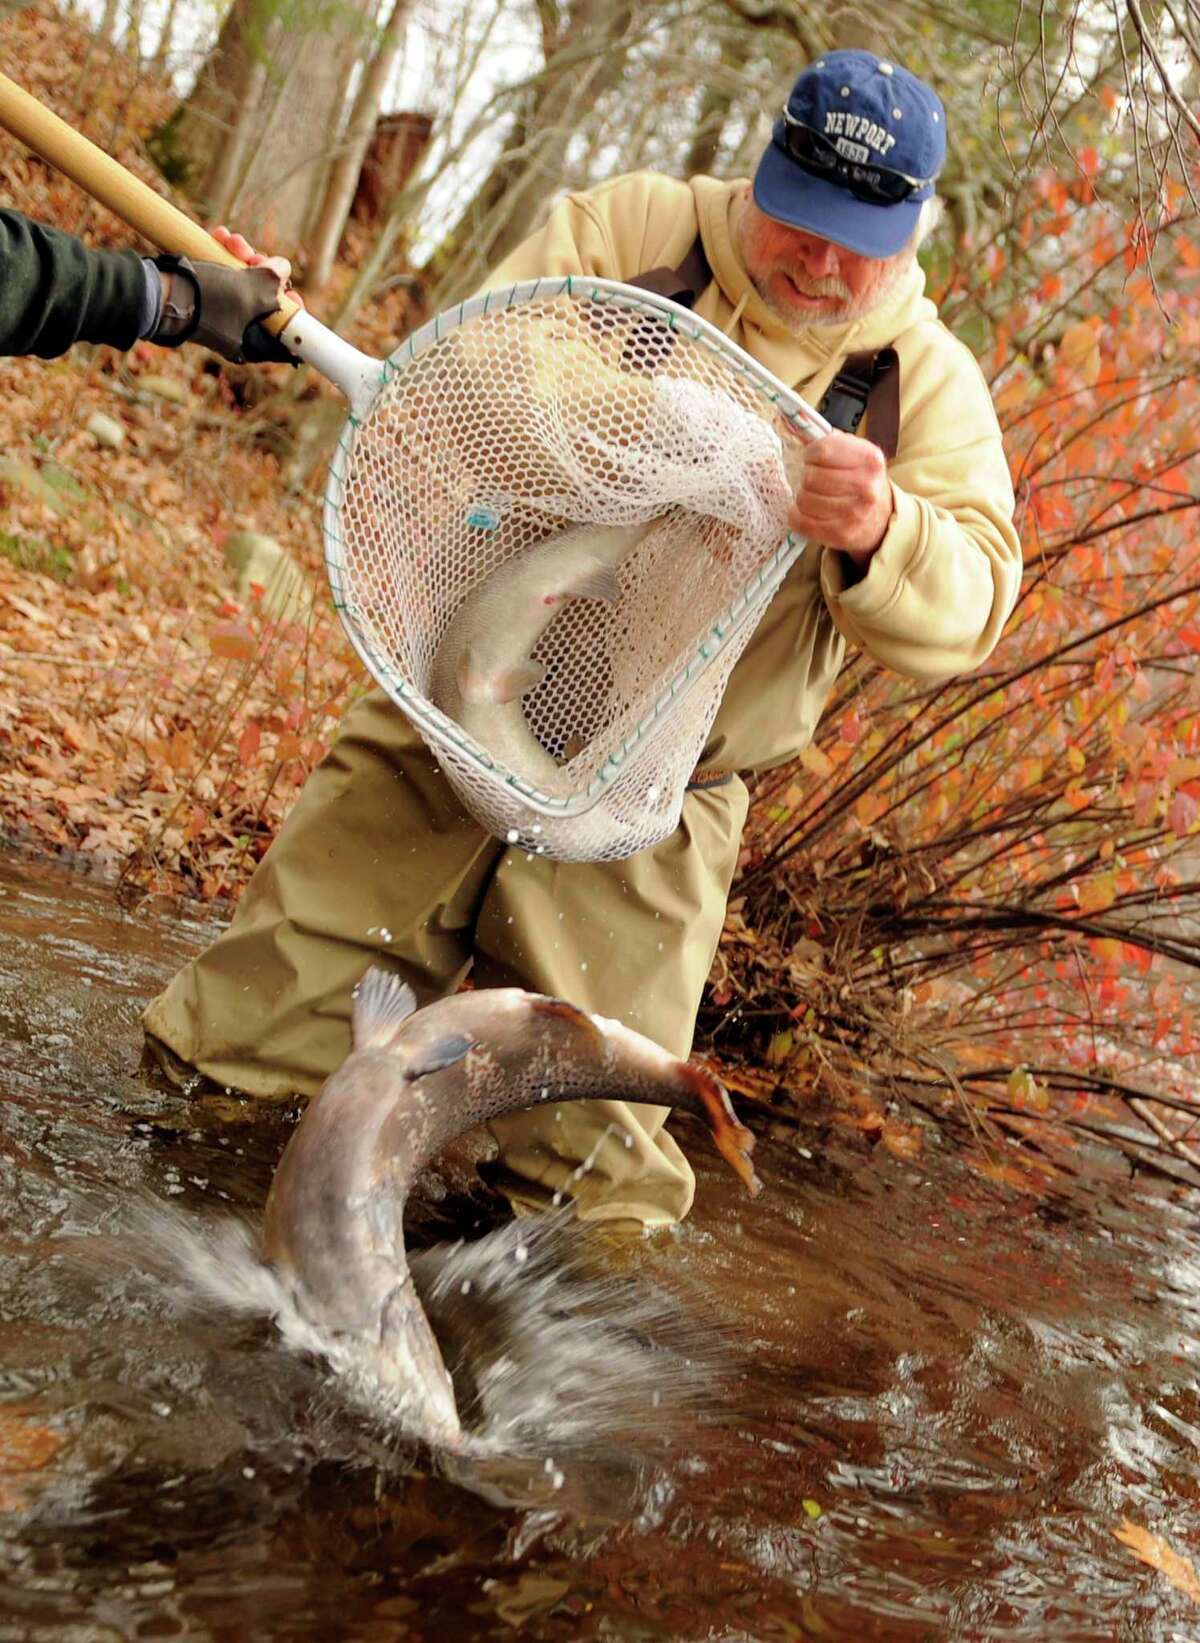 File photo: Dale Williams, a volunteer from Trout Unlimited, helps staff from the Connecticut Department of Environmental Protection Inland Fisheries Division stock Atlantic salmon into the Shetucket River in Sprague, Conn., on Tuesday, Nov. 9, 2010.